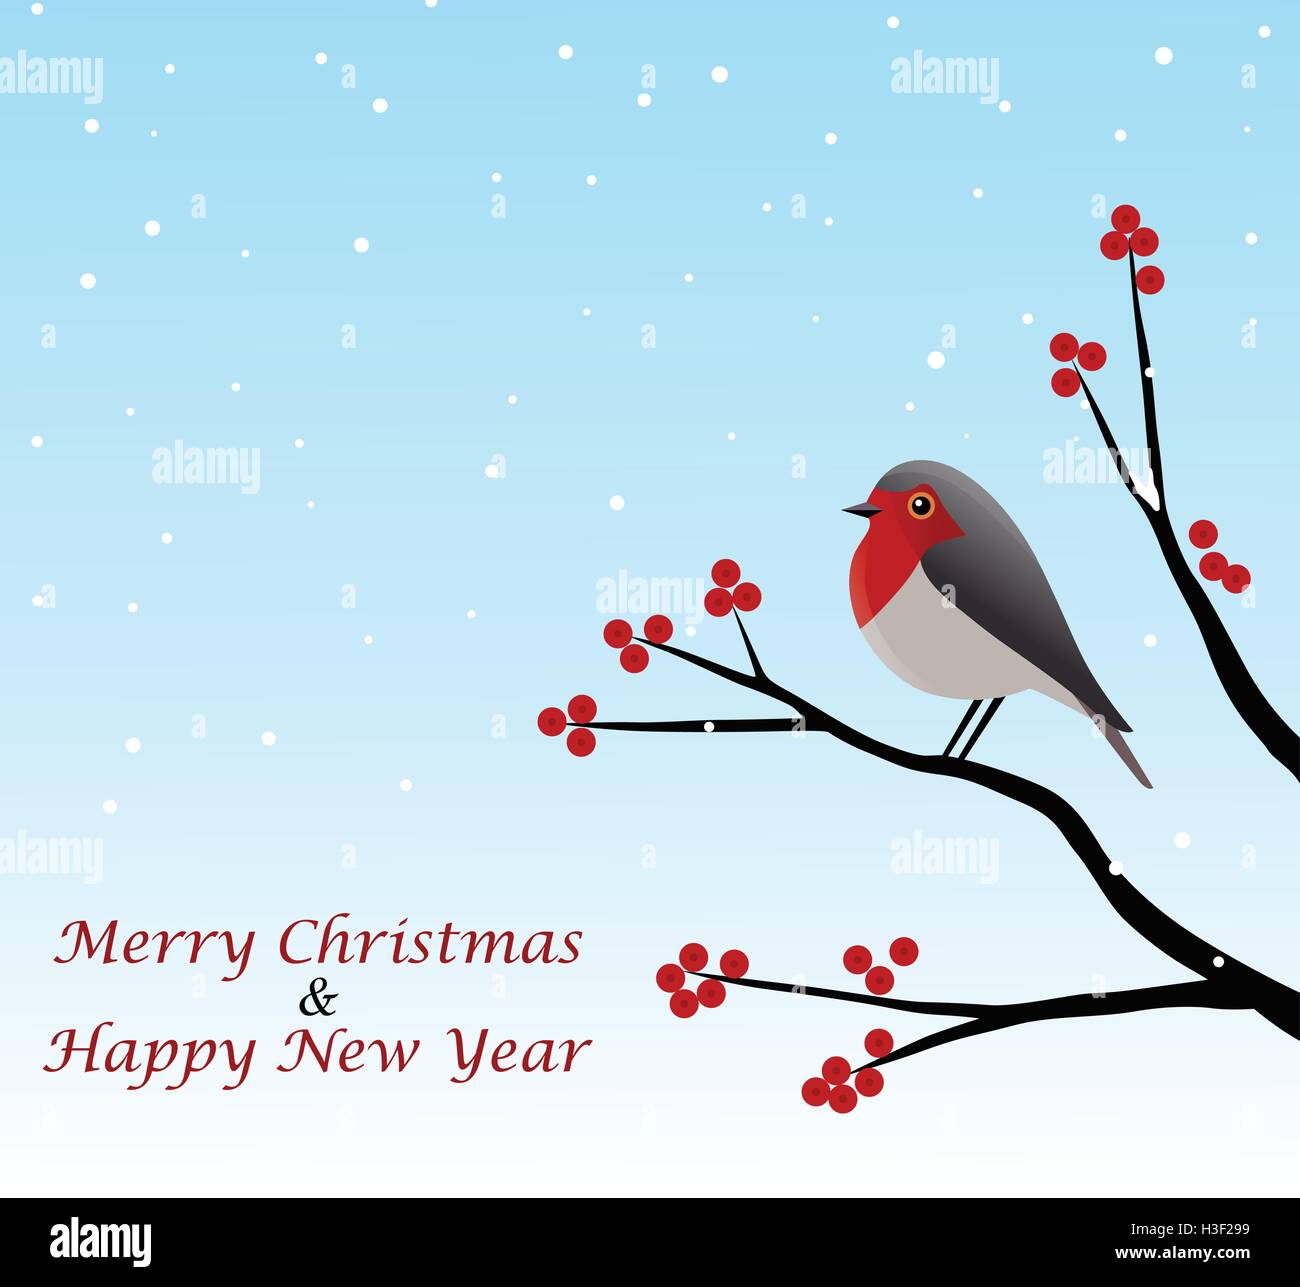 Christmas Greeting With Red Robin Sitting On Branch Vector Illustration Stock Vector